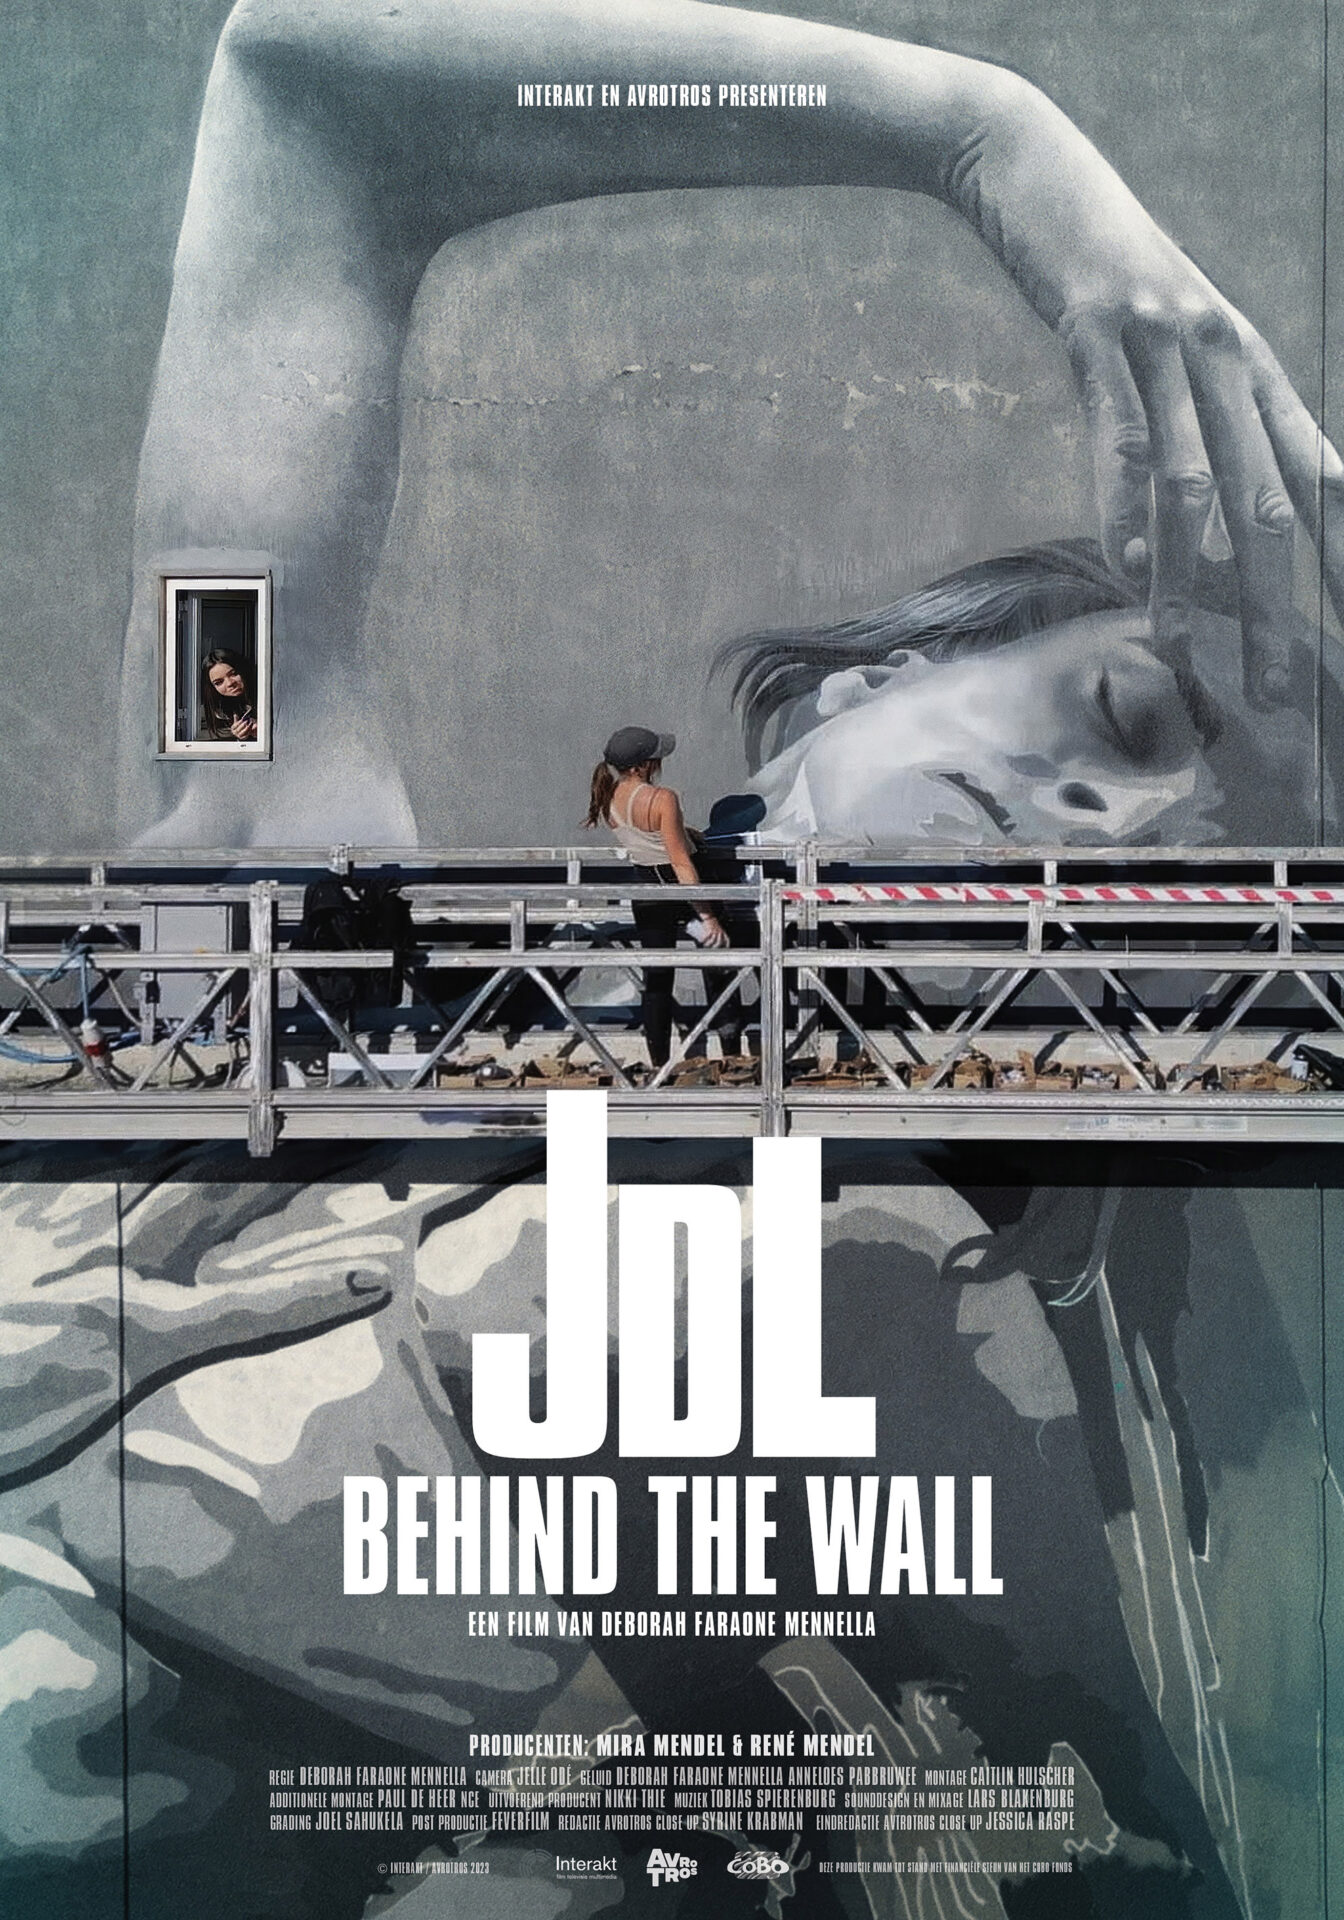 JDL - Behind the Wall